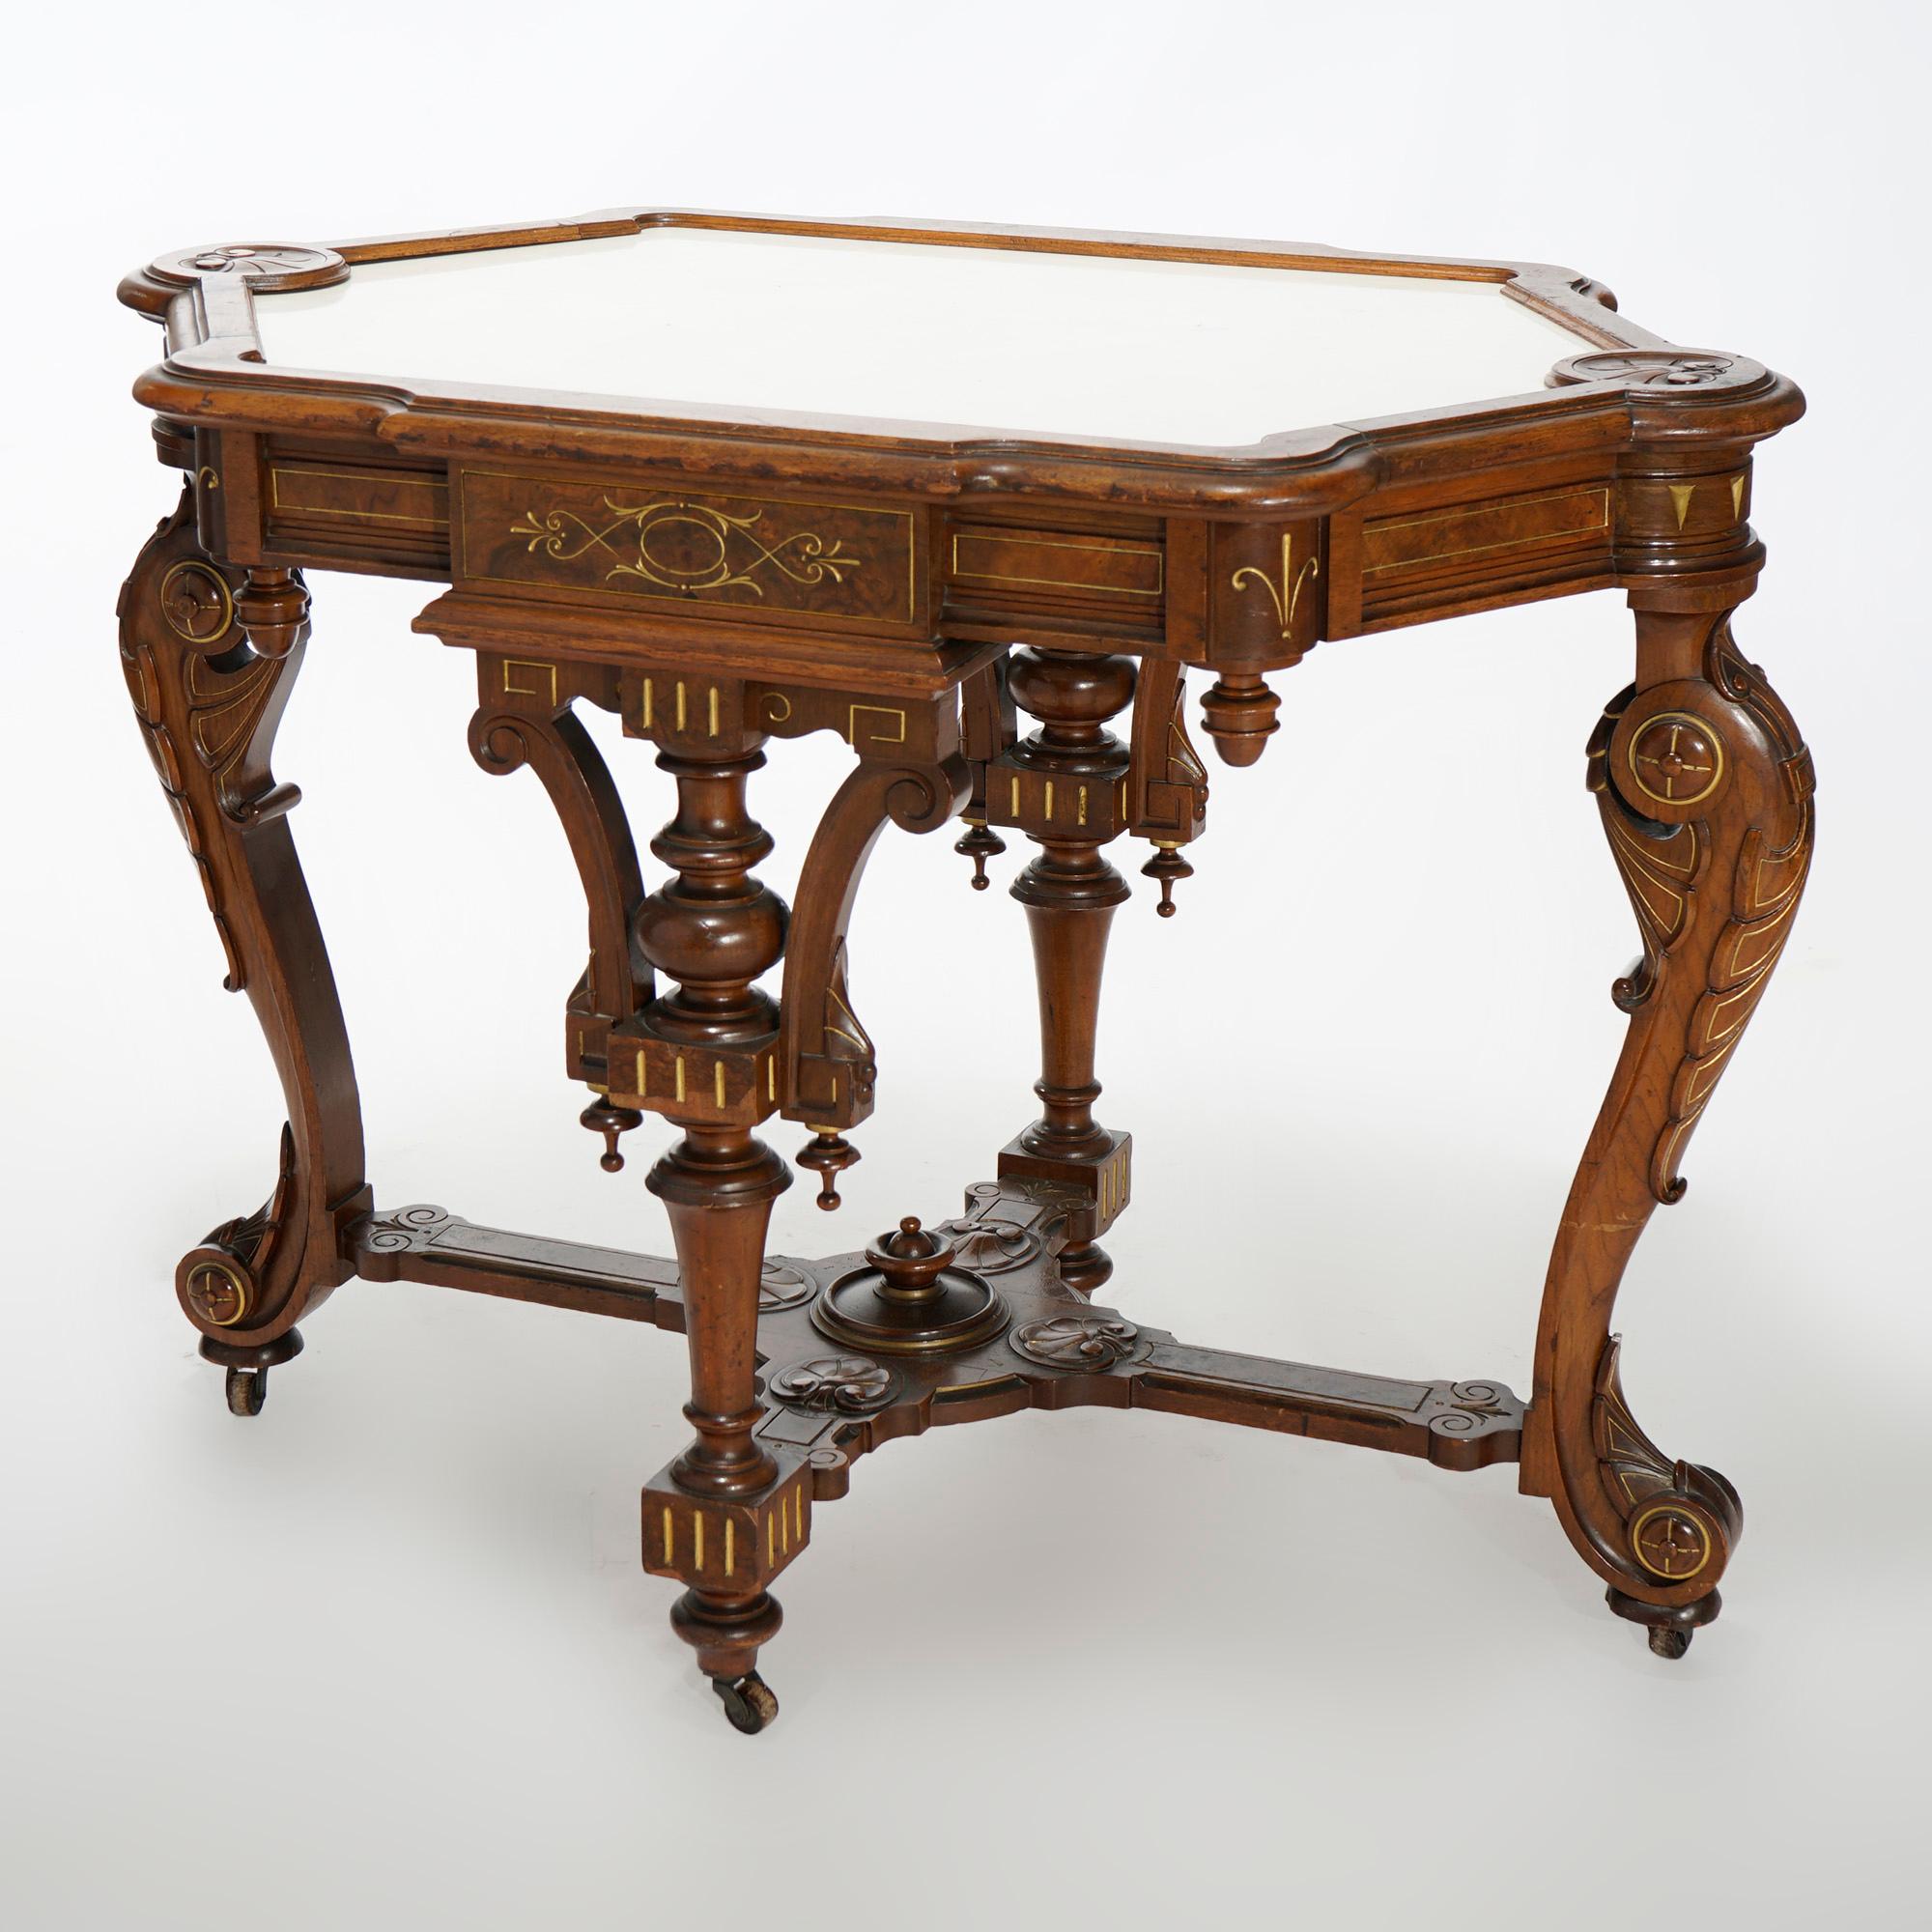 An antique and highly ornate Renaissance Revival parlor table offers walnut and burl construction with shaped picture frame marble top with carved shell elements over base having turned balustrade and cabriole legs, carved acanthus and foliate